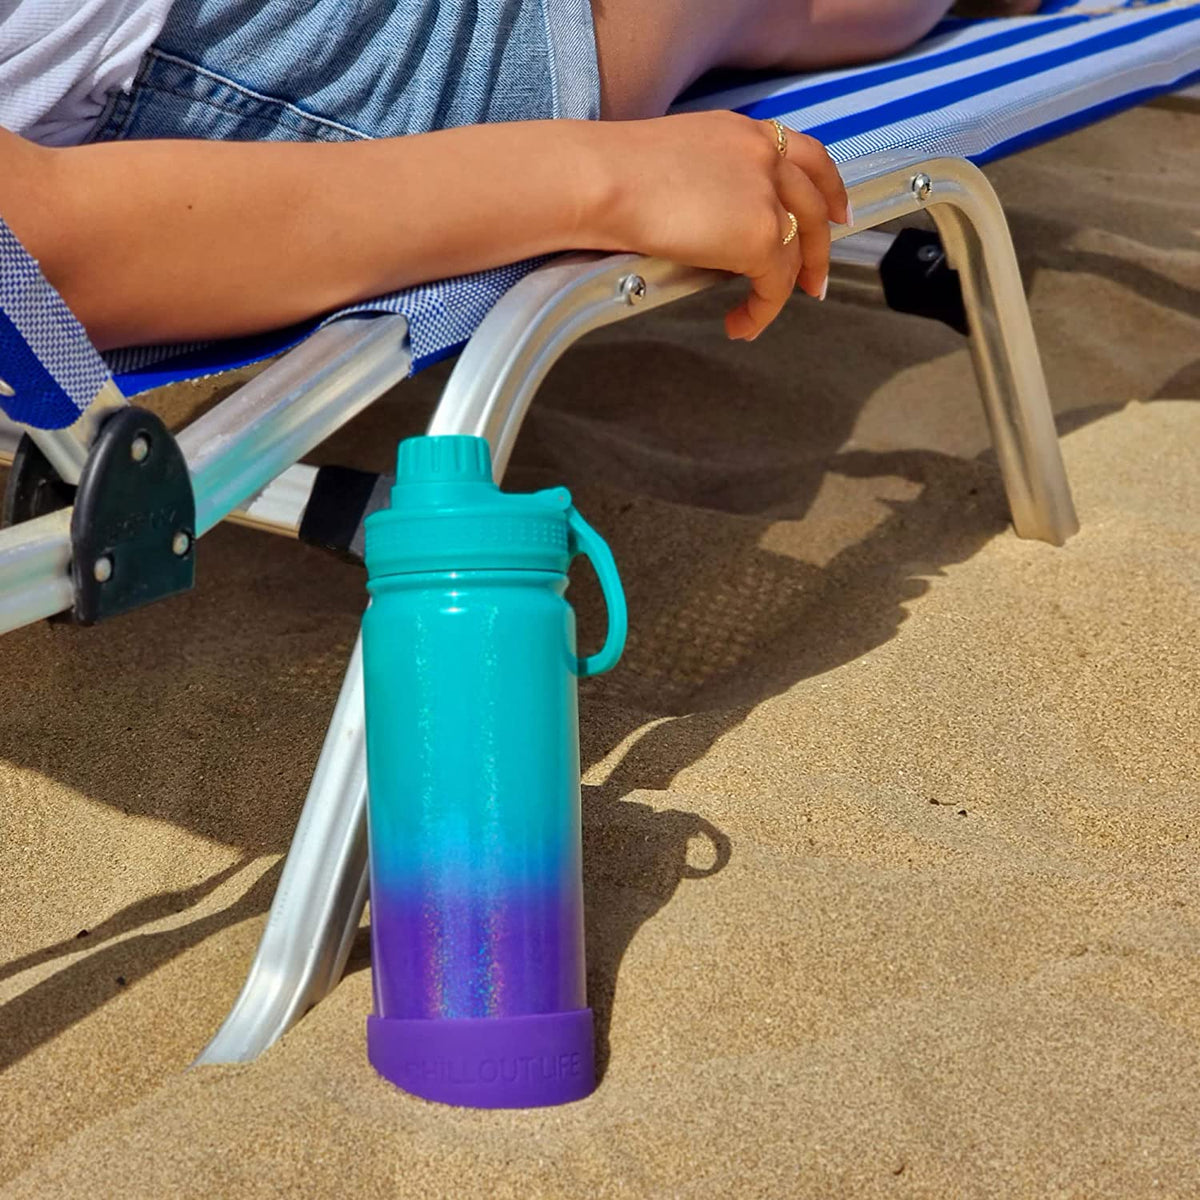 CHILLOUT LIFE 17 oz Insulated Kids Water Bottle with Leakproof Spout L